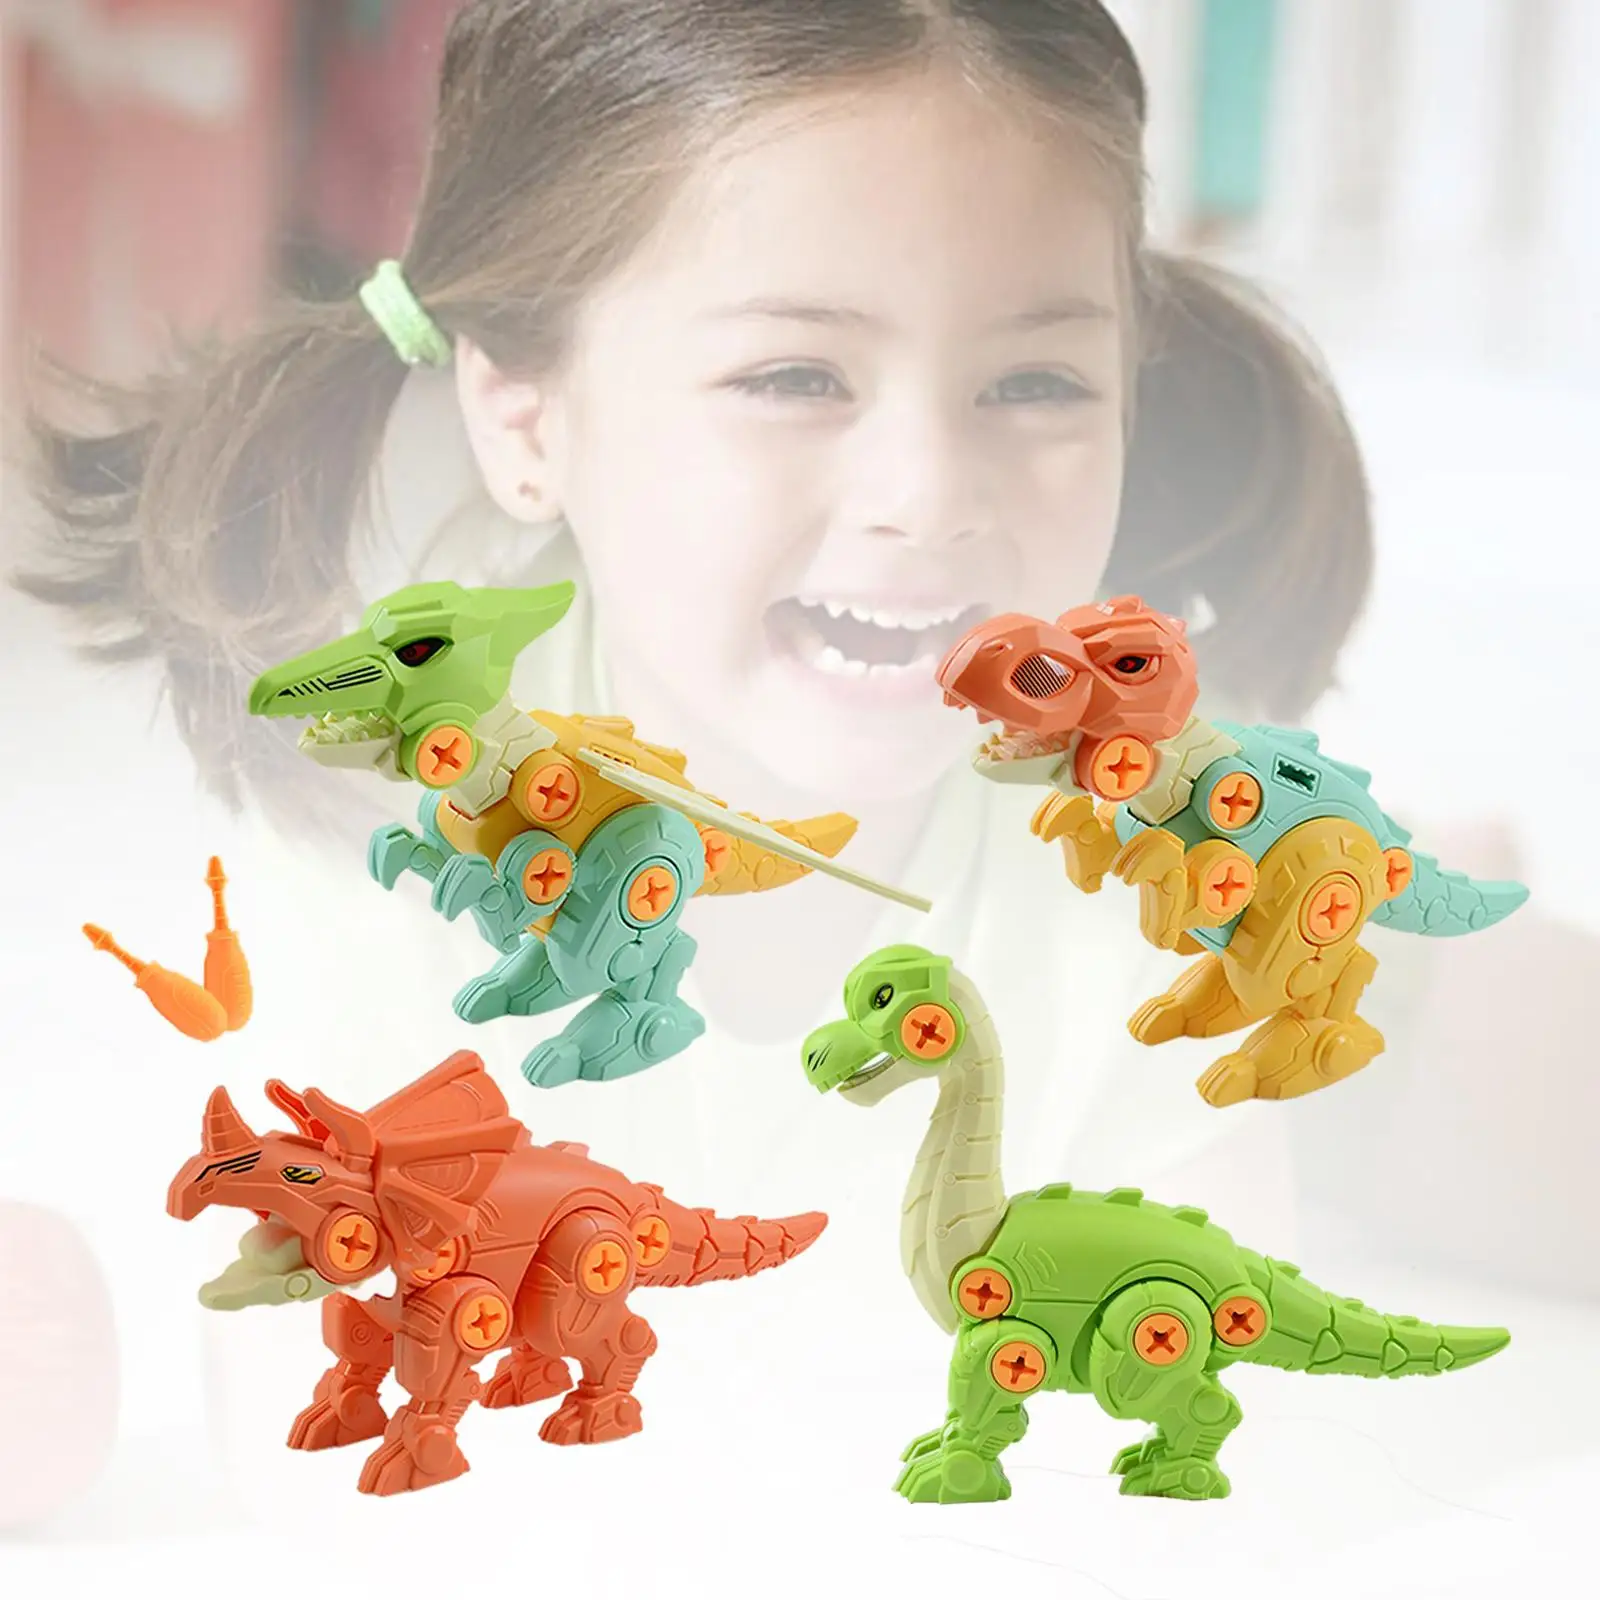 4 Pieces Take Apart Dinosaur Model Toy Set with Screwdriver Educational Toy Building Toy Christmas Gifts for Toddlers Girls Boys